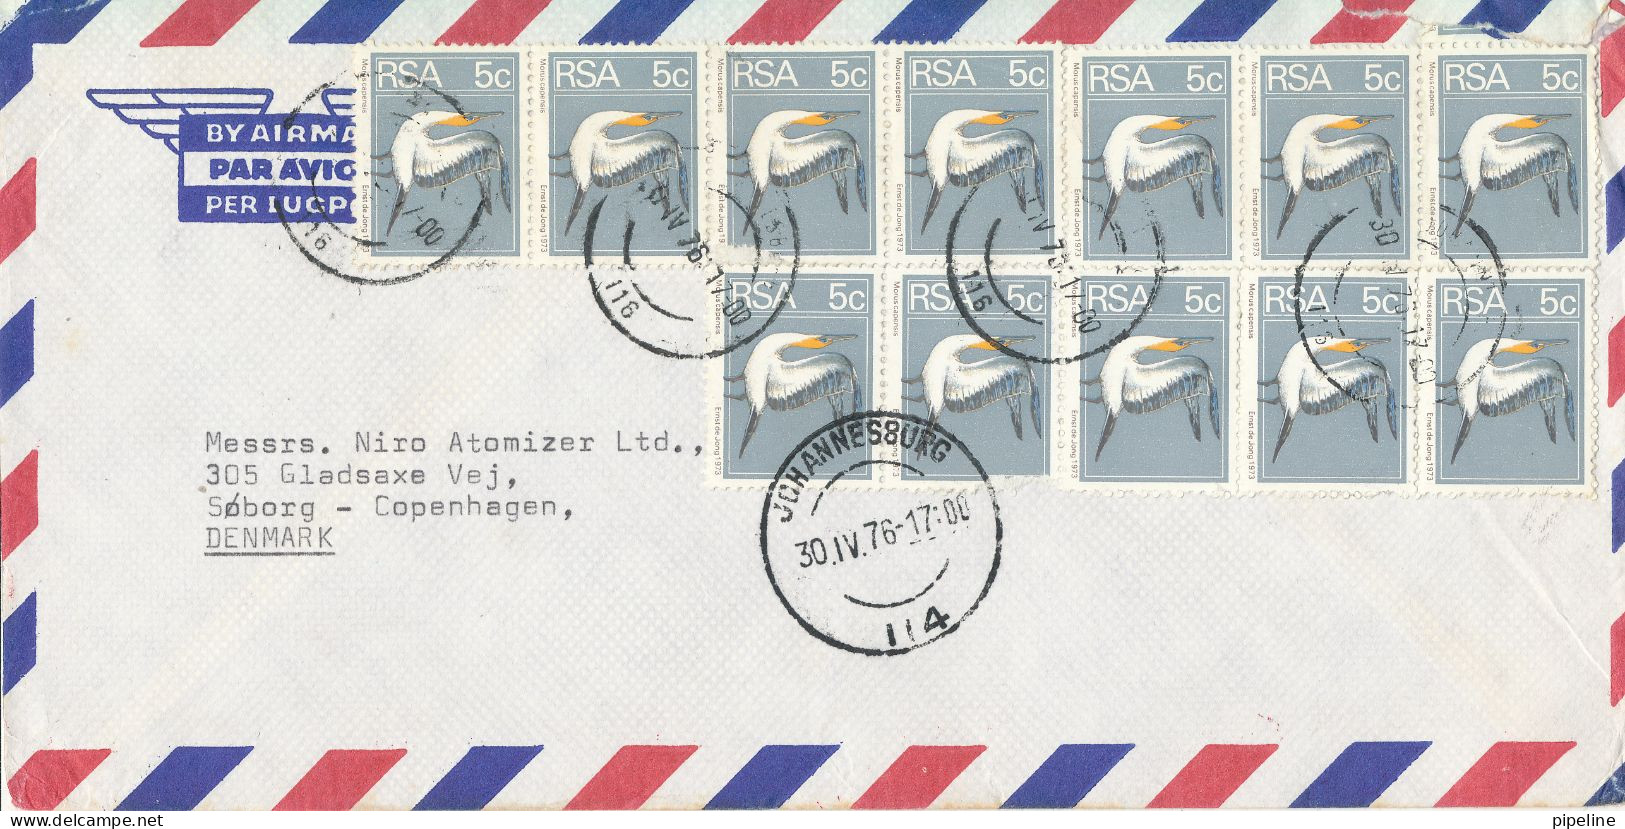 South Africa RSA Air Mail Cover Sent To Denmark 30-4-1976 With A Lot Of BIRD Stamps - Poste Aérienne